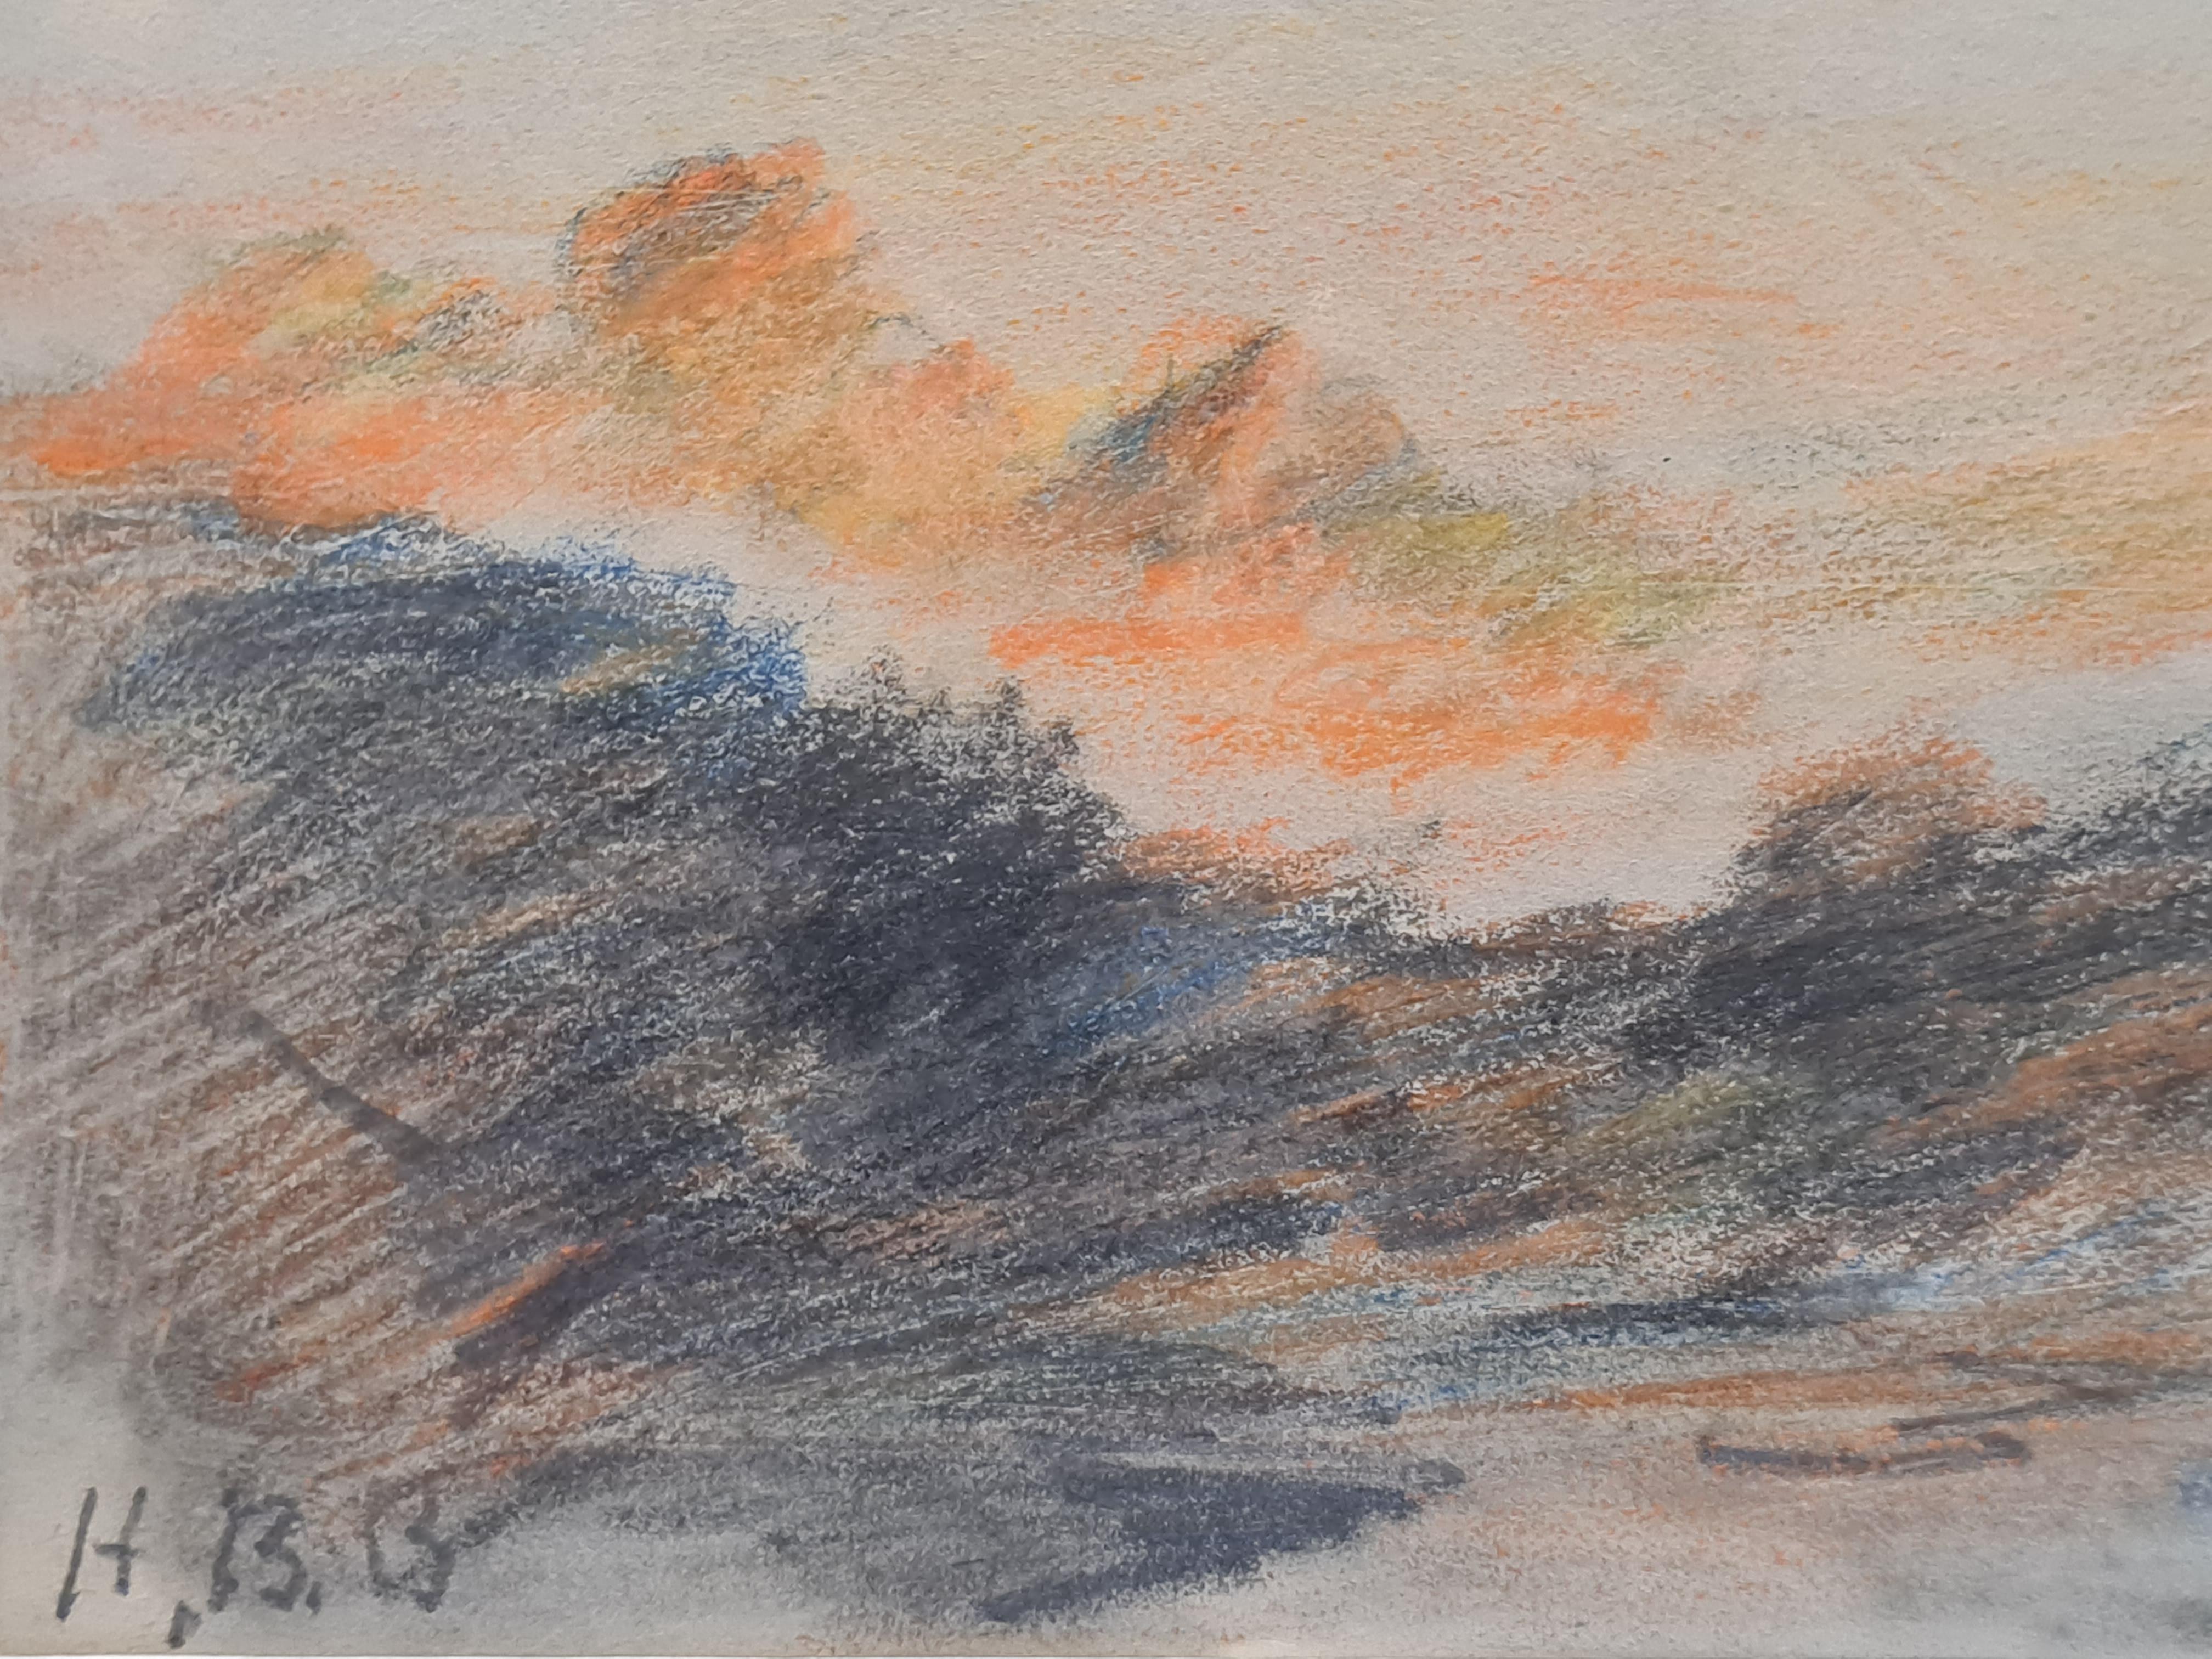 Late 19th century drawing and crayon view of a sunset over the Alps by Hercules Brabazon Brabazon. Initial signed (HBB) by the artist.

Brabazon would have visited, seen and drawn the Alps on one of his trips to Italy, France or Switzerland and